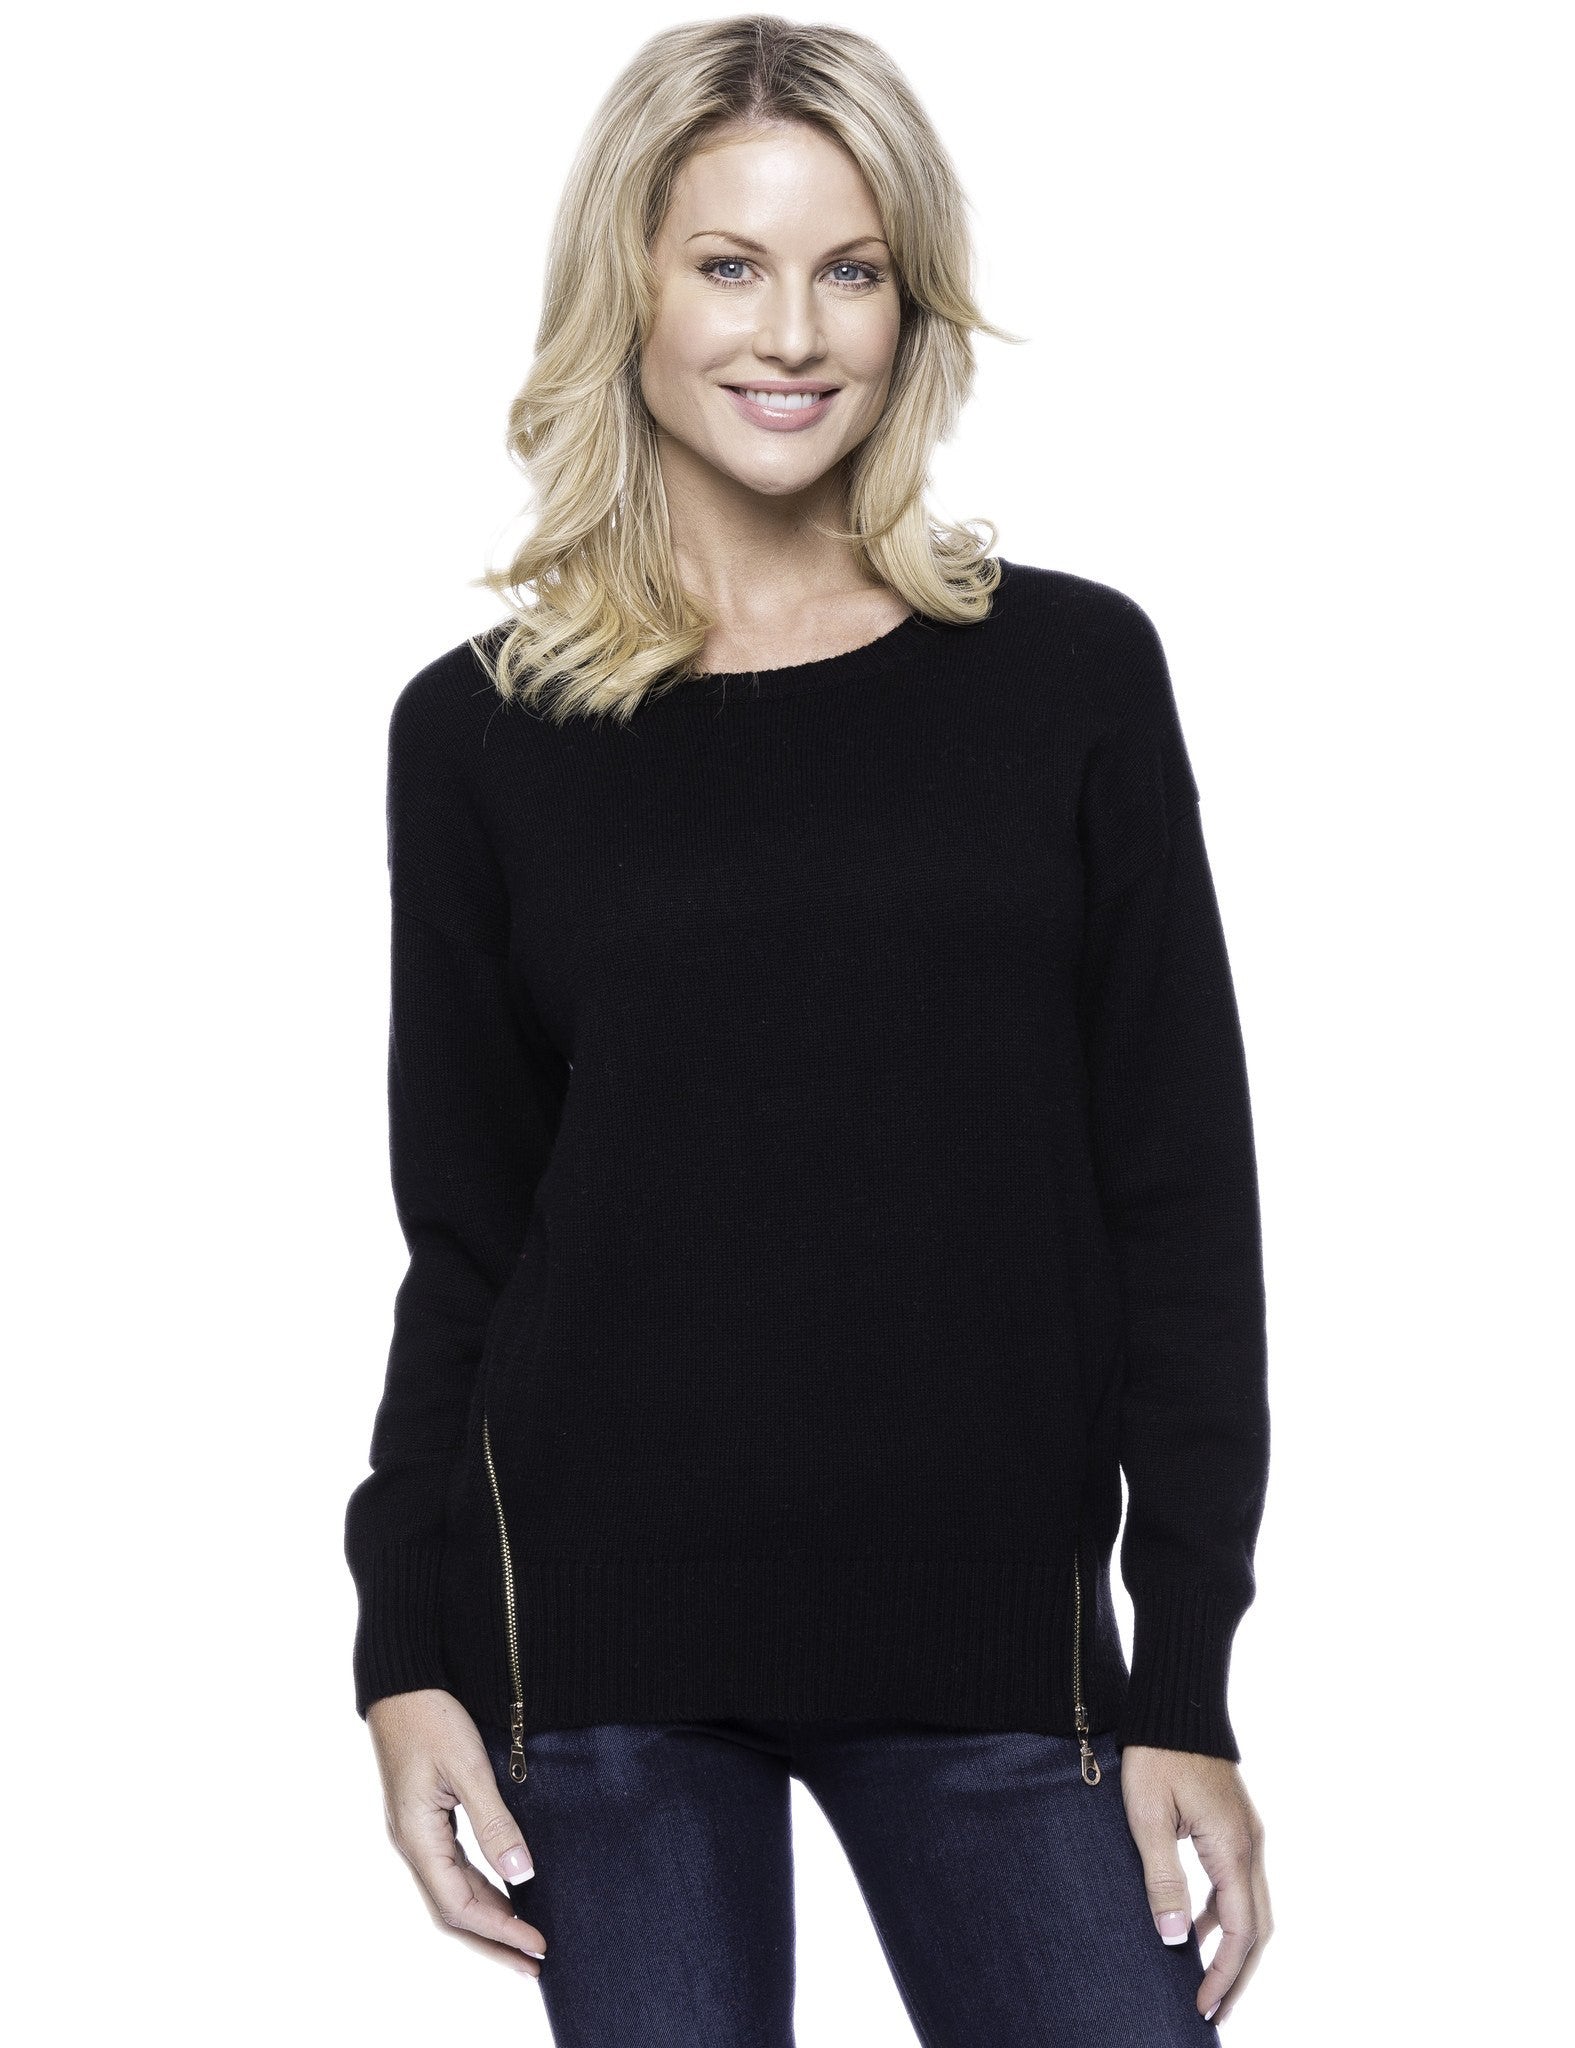 Box-Packaged Tocco Reale Women's Cashmere Blend Crew Neck Sweater with Side Zip